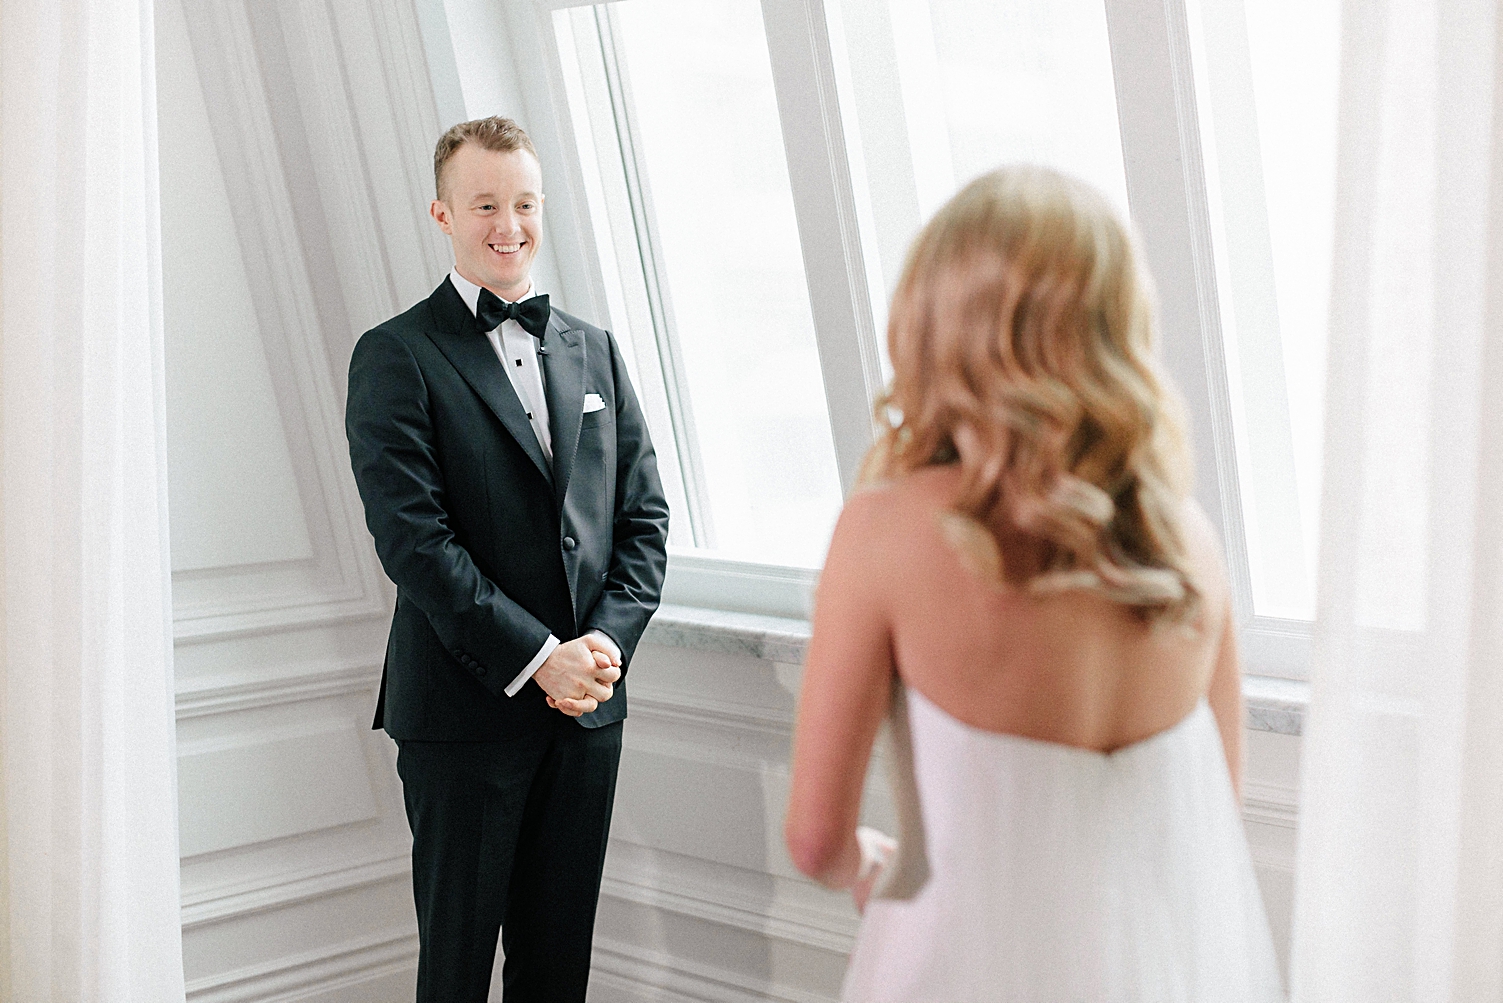 groom in tuxedo seeing bride for first time